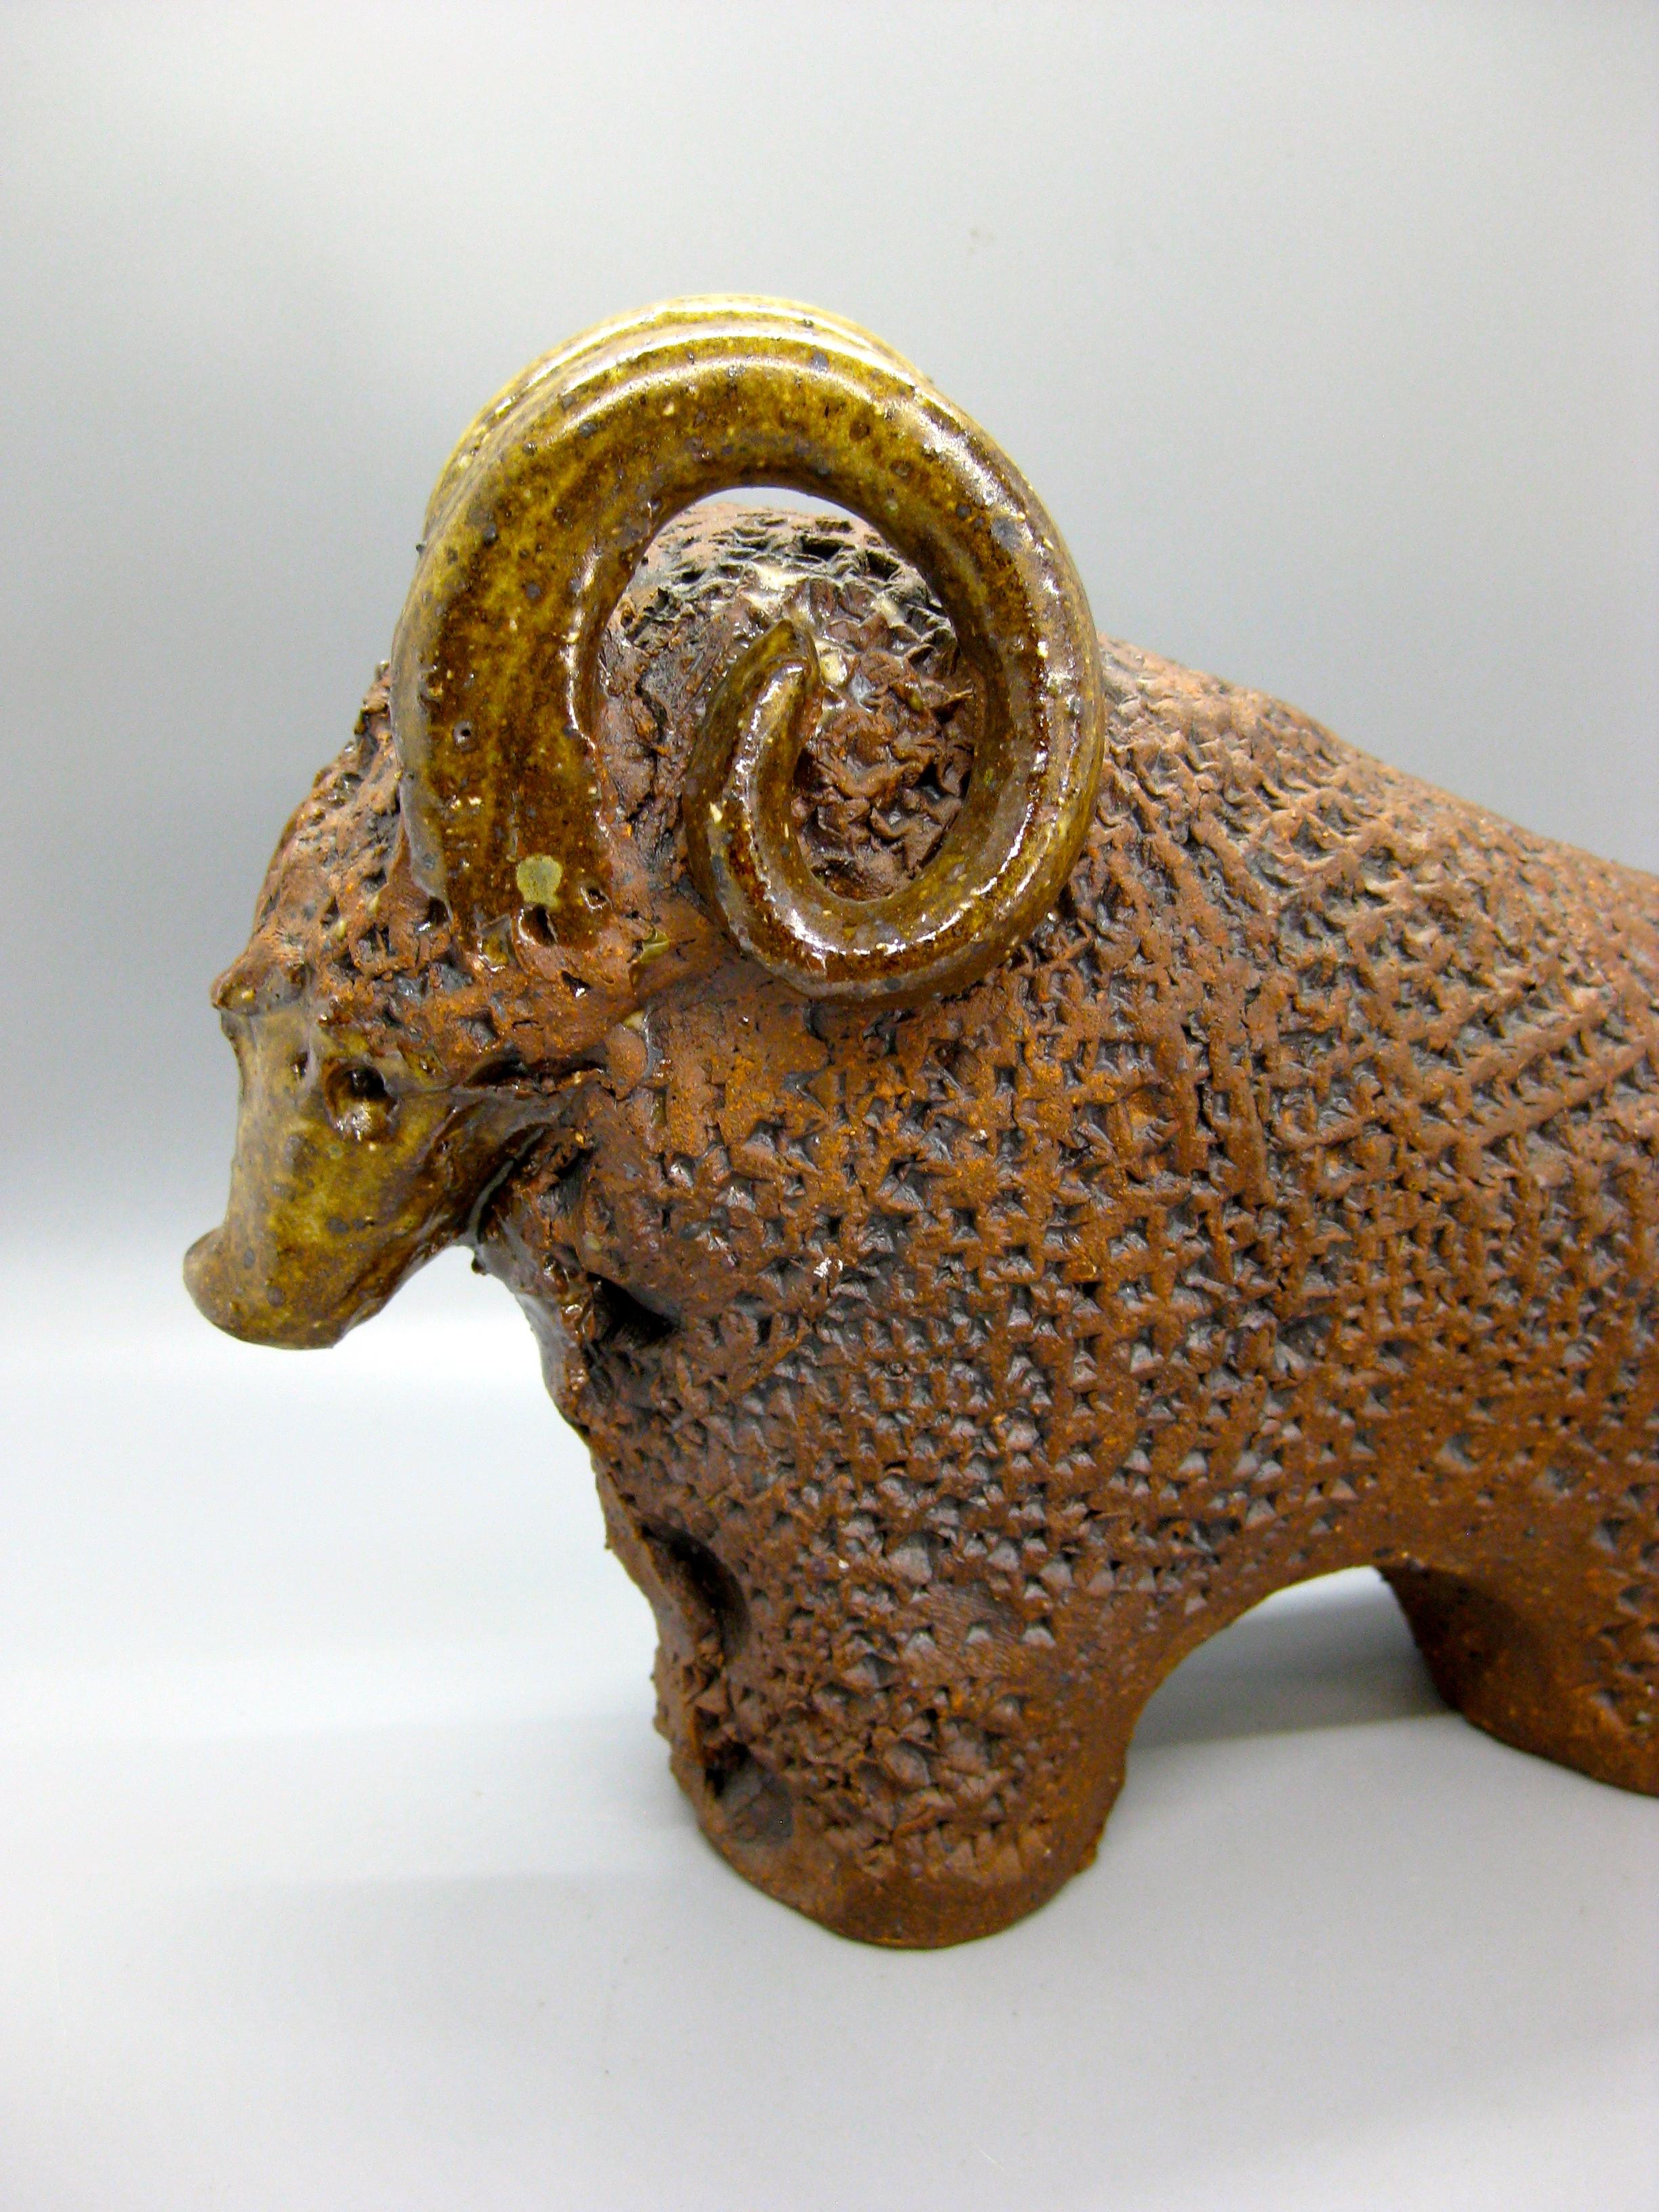 Great California Design studio pottery ram figurine sculpture by Frank Matranga and dates from the 1960's. Wonderful design and form. Has glaze accents. Hand made by the artist and signed on the bottom. In excellent condition. No chips, no cracks